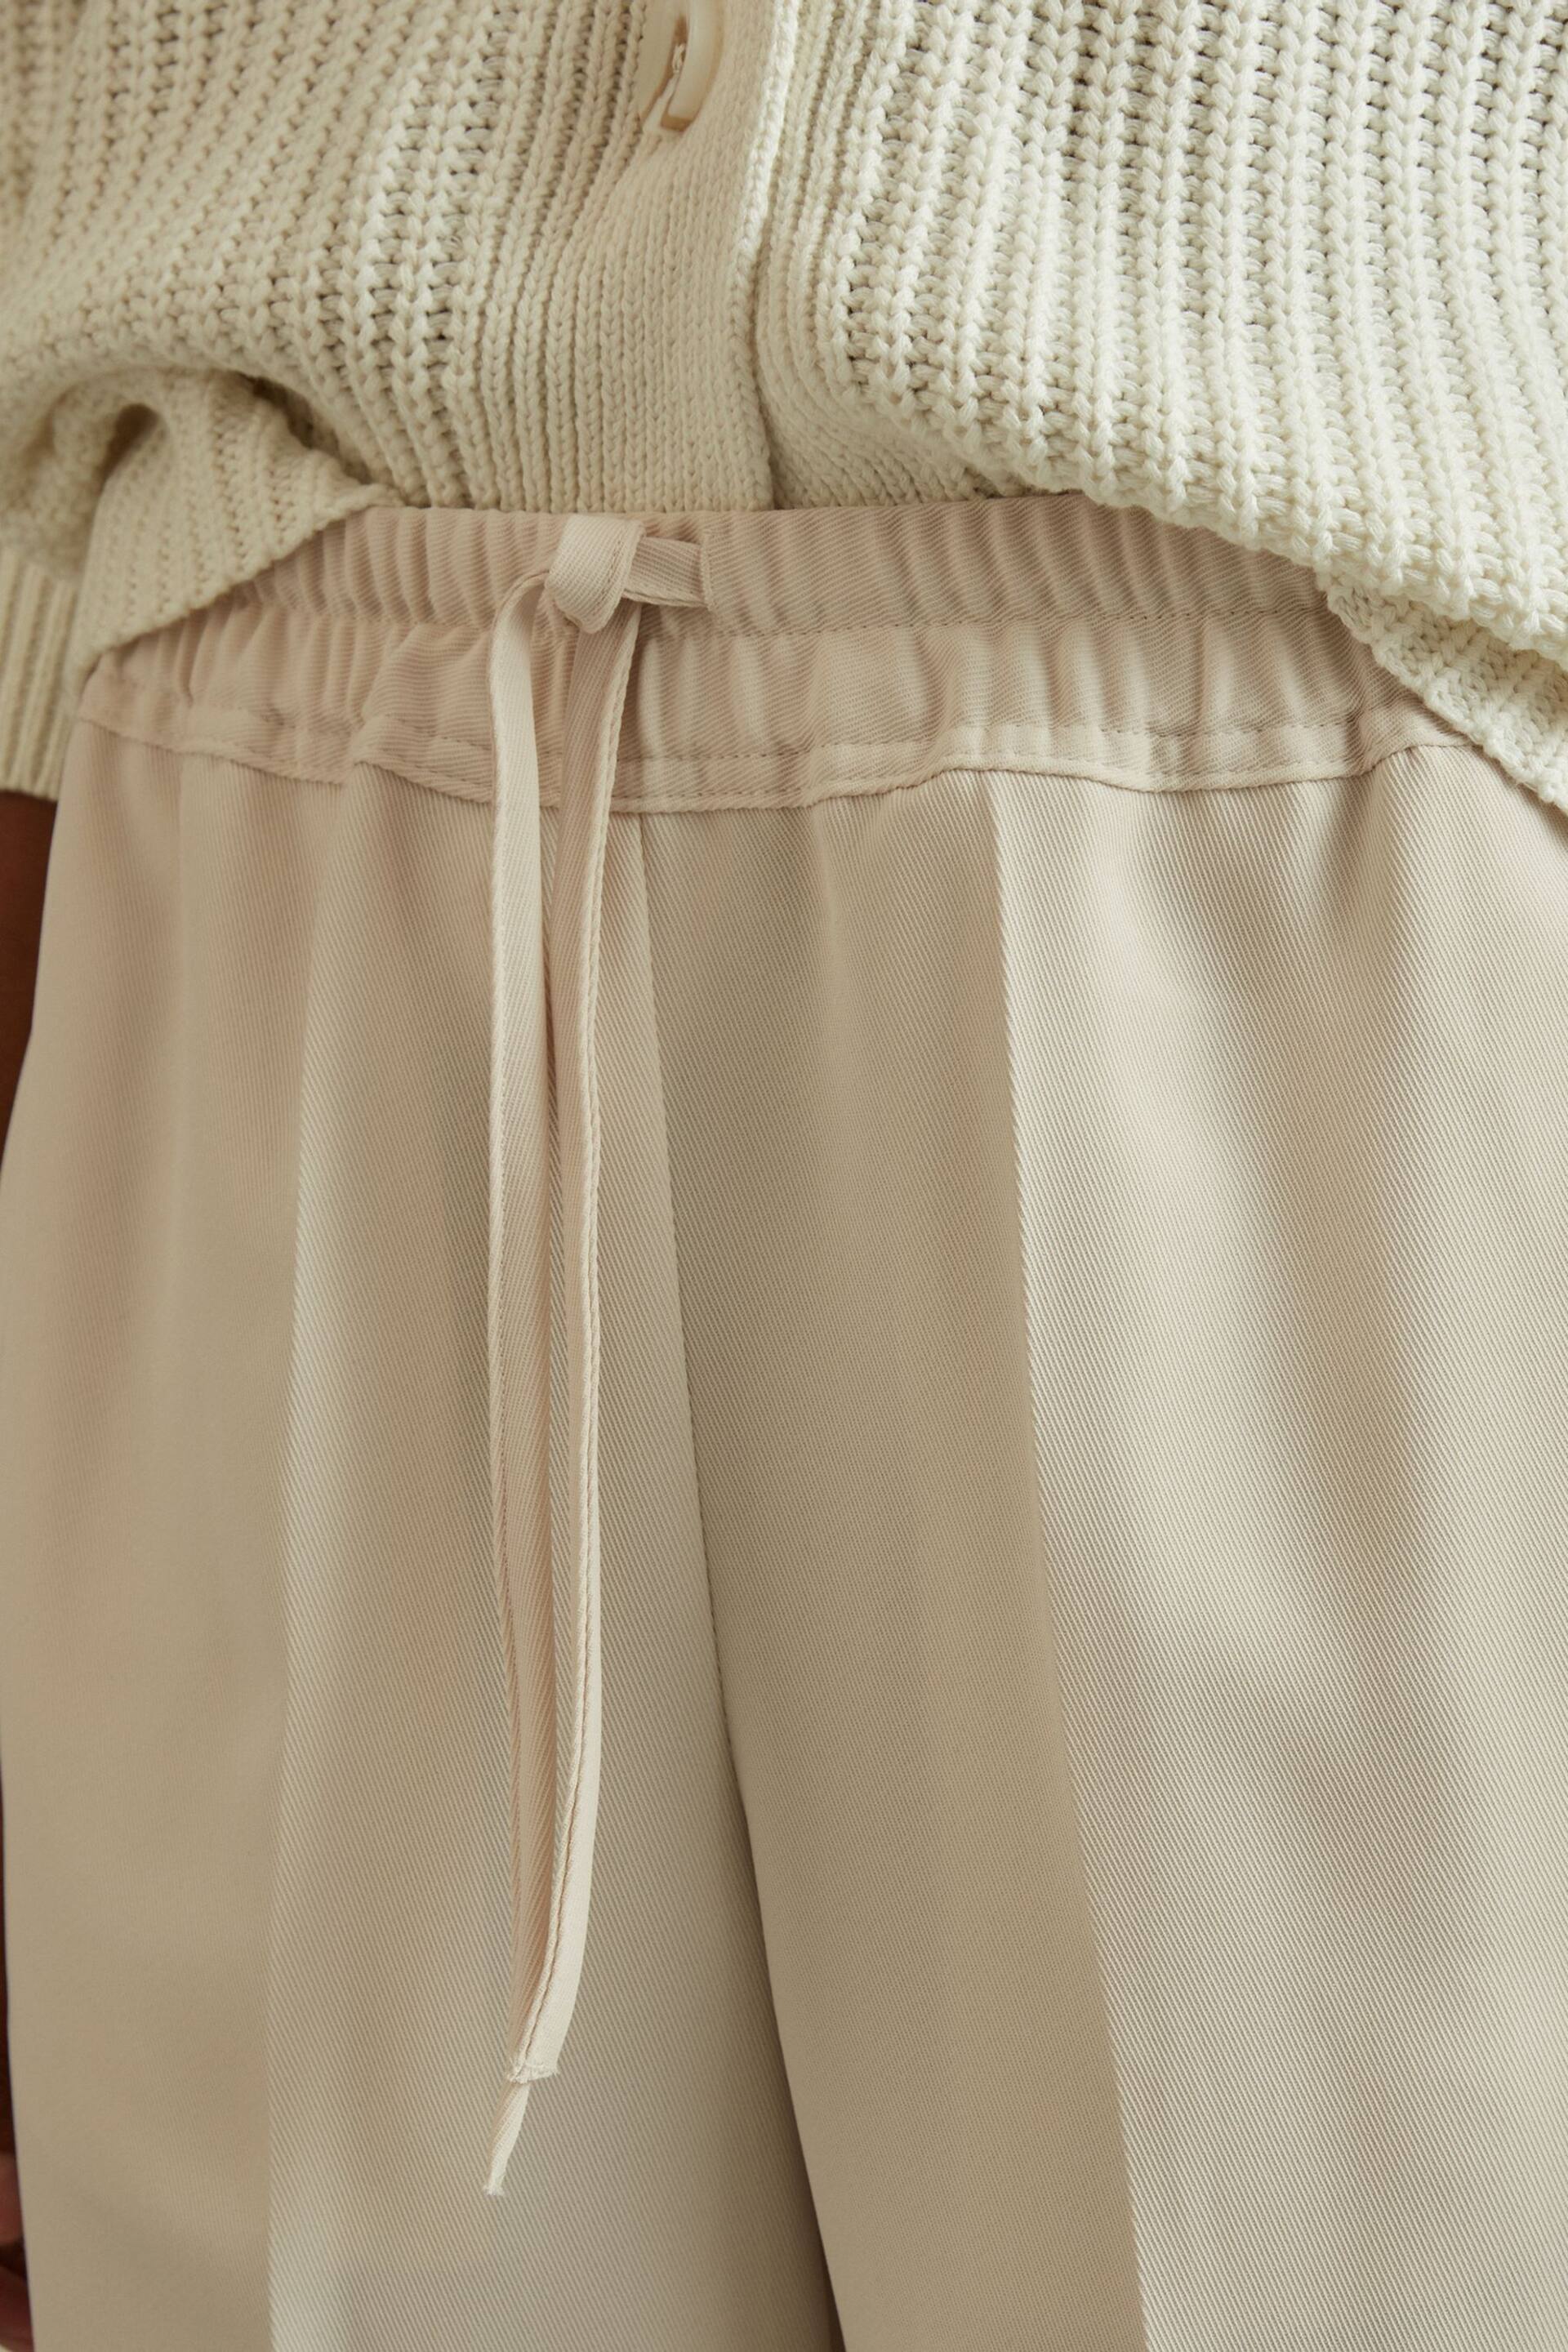 Reiss Cream Hailey Petite Tapered Pull On Trousers - Image 4 of 6